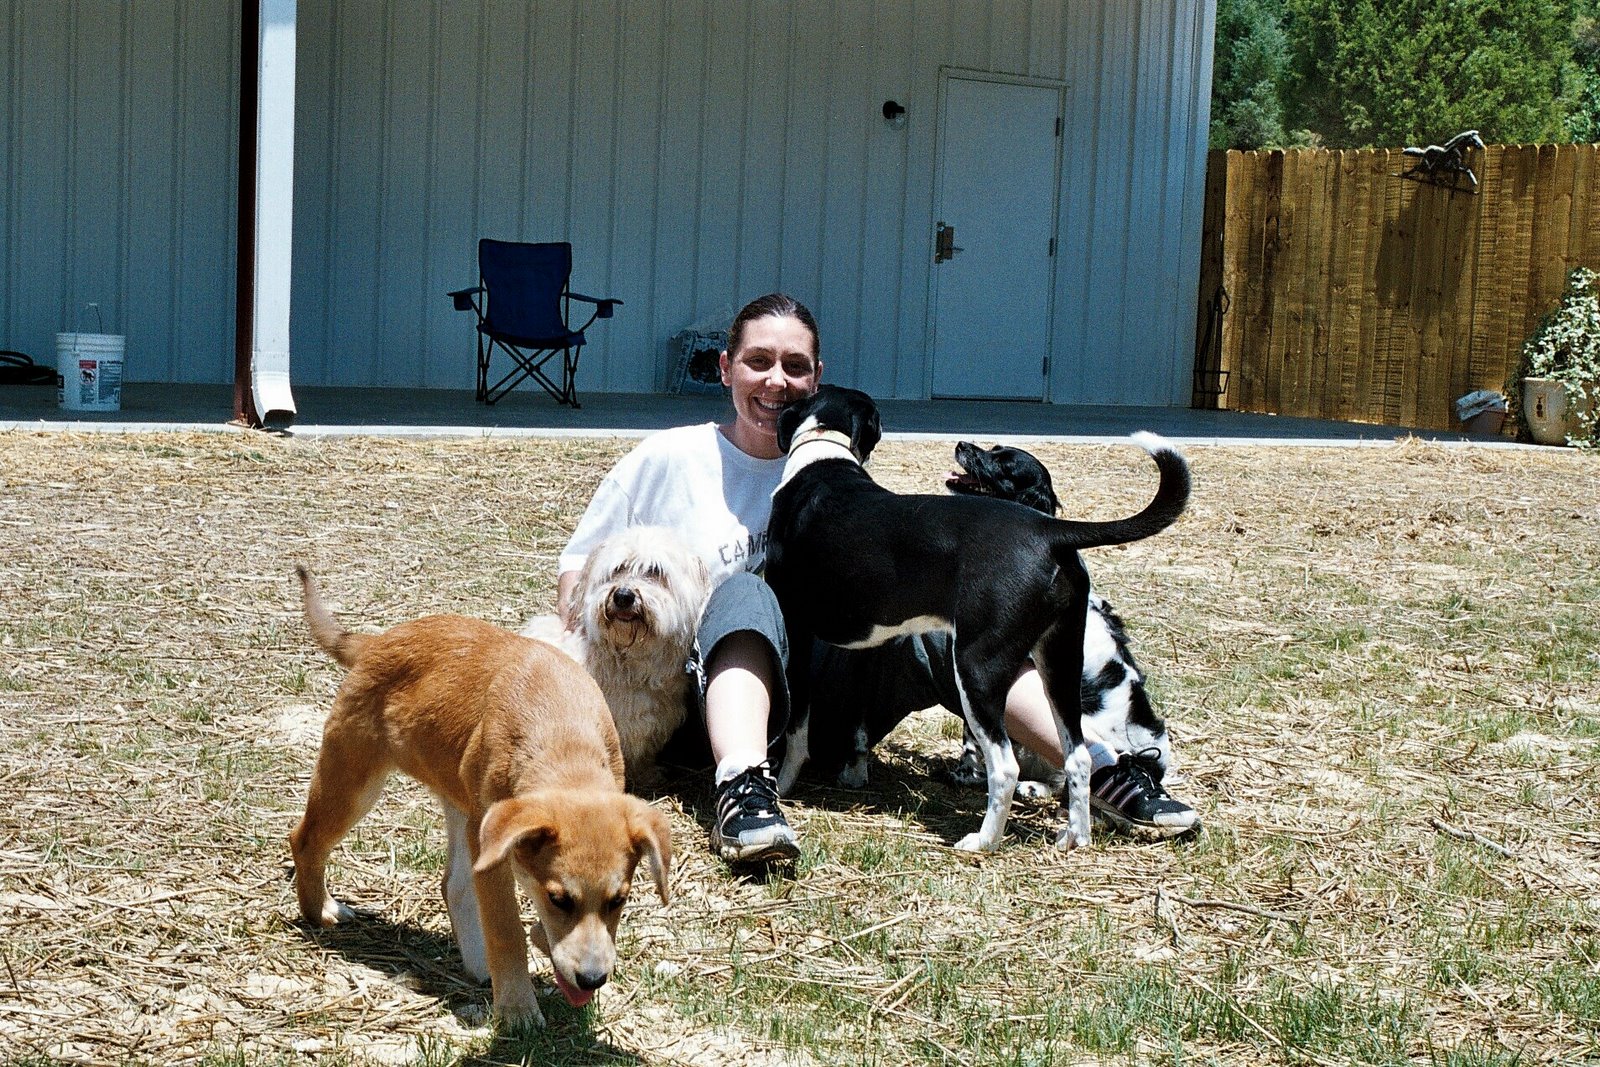 [Camp+Counselor,+Beth+Kelly,+with+canine+campers.jpg]